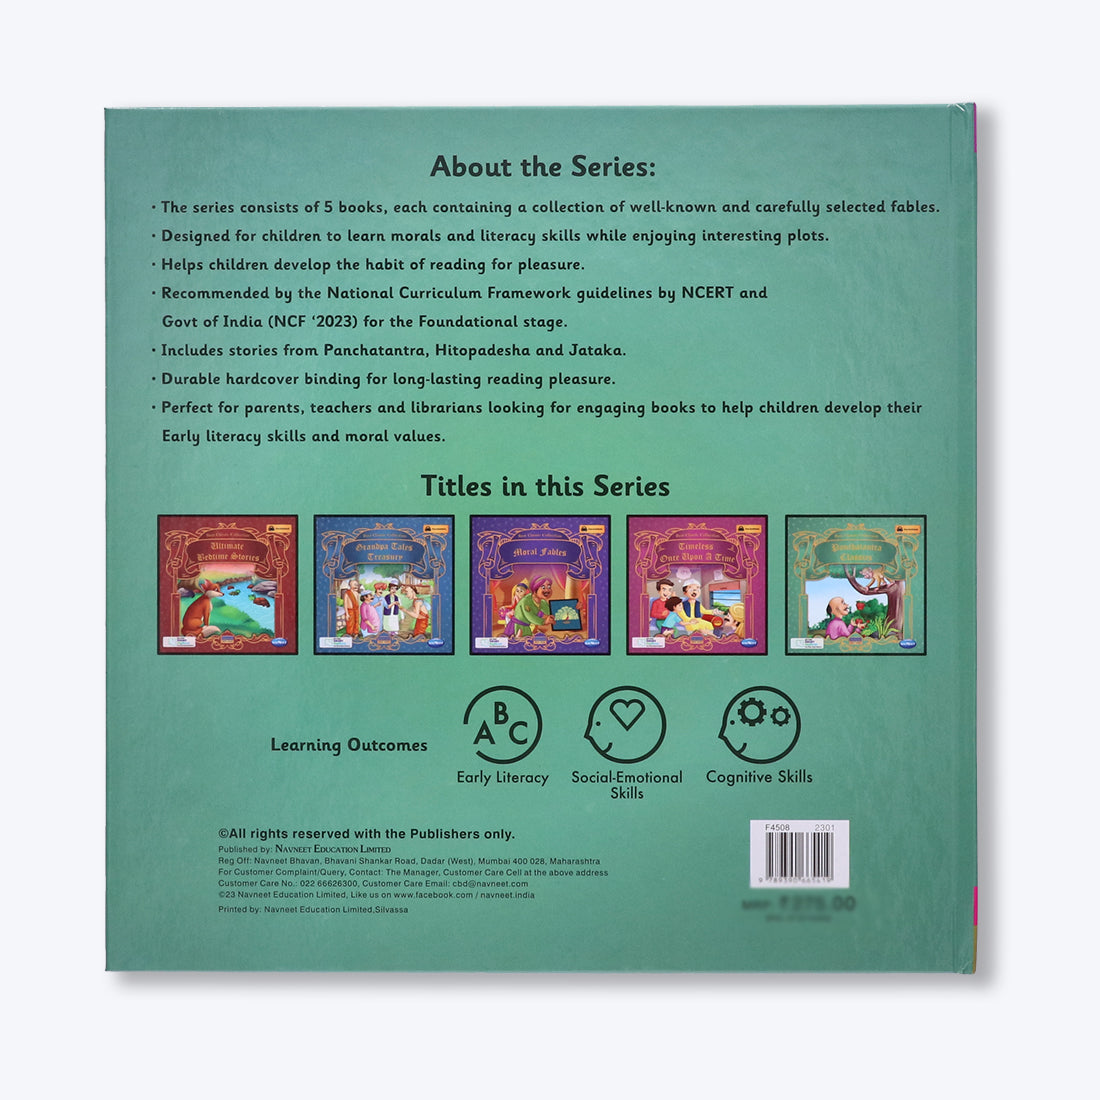 Navneet Best Classic Collection- Panchatantra Classics Vocabulary Words- With Colourful Illustrations- Read aloud stories- Bedtime Stories- Audio Book- Social-Emotional